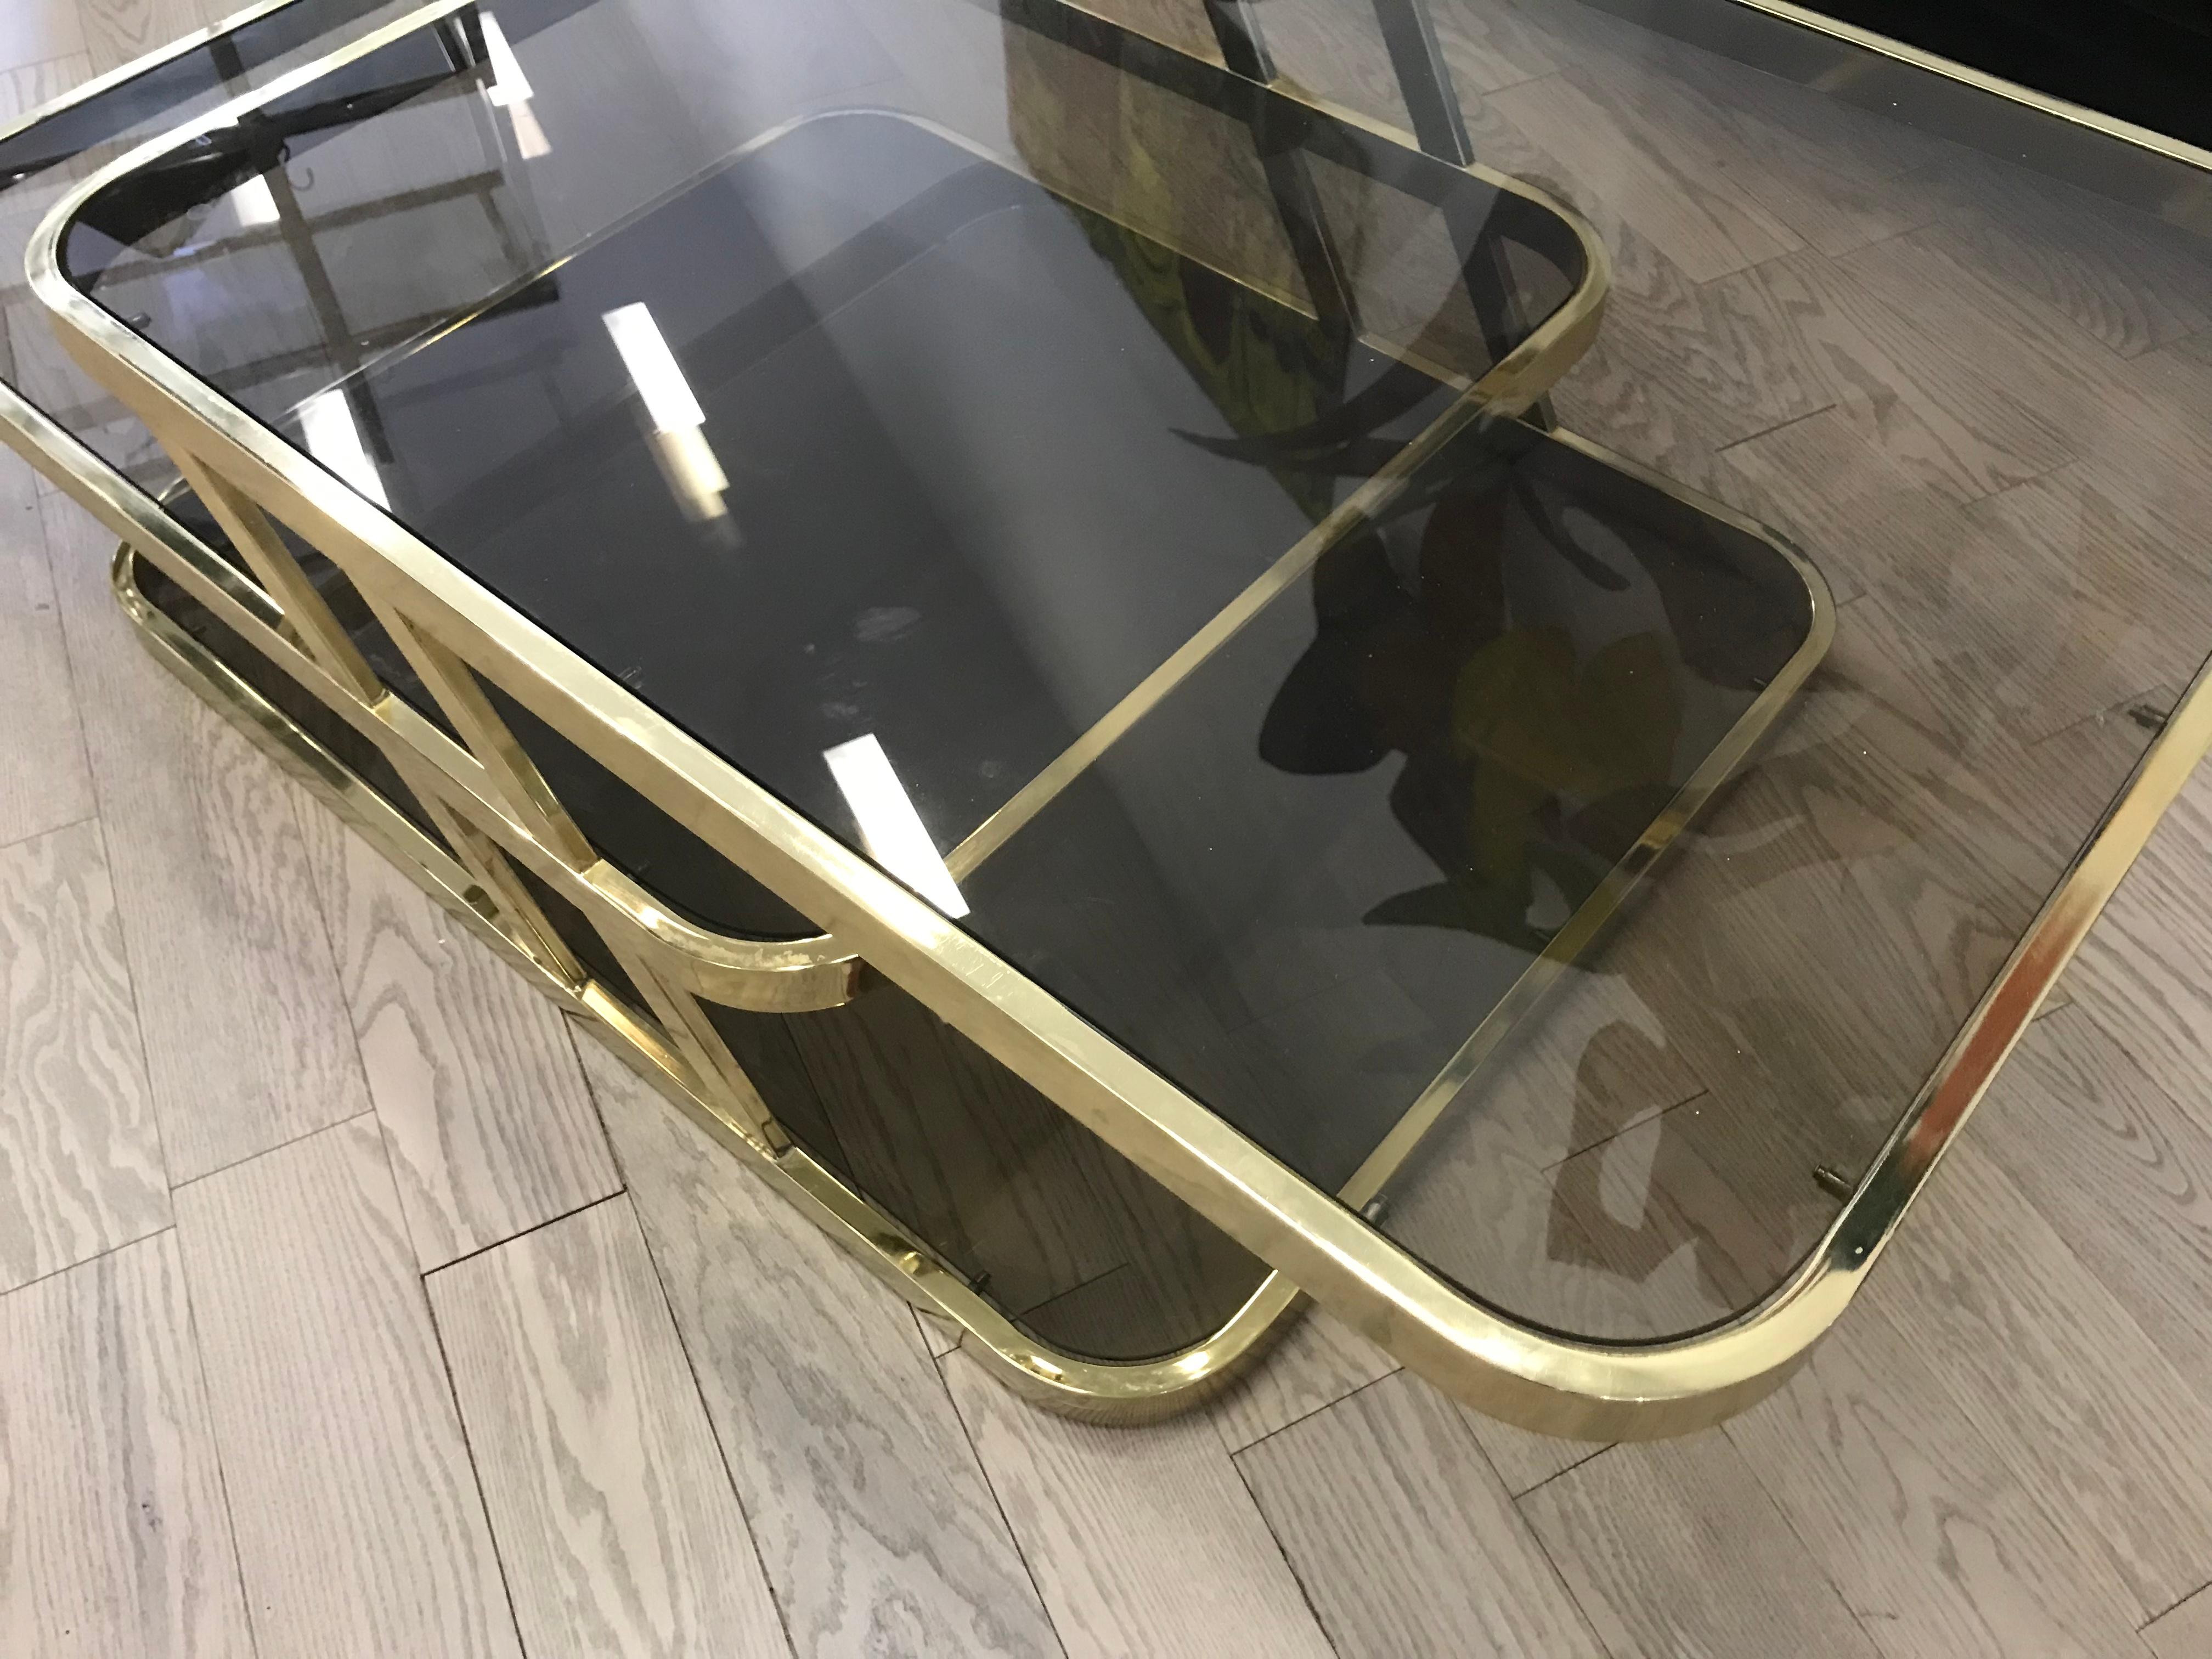 This is a nice coffee table with 3 levels and brass colored metal. Design Institute Of America. The shelves are a Smokey color glass. It looks nice with the warm brass finish.